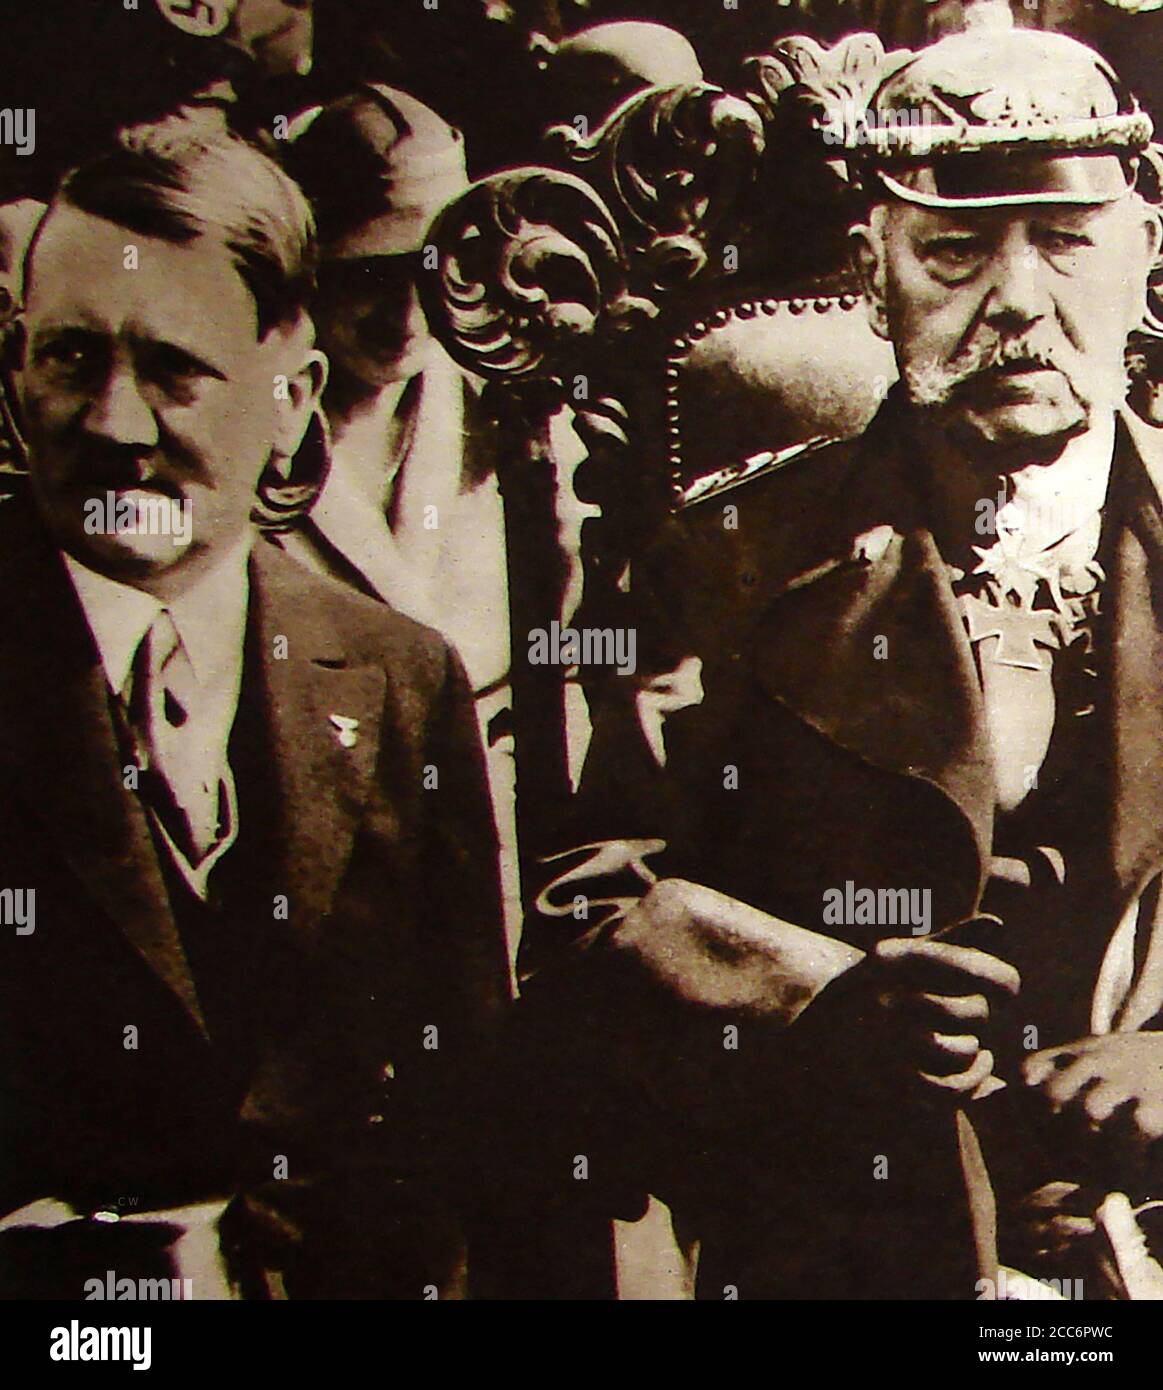 1933 Adolph Hitler and President Hindenburg together (Hindenburg died the following year and Hitler assumed office. Paul Ludwig Hans Anton von Beneckendorff und von Hindenburg, known more simply as Paul von Hindenburg   was  German  statesman who led the Imperial German Army as General during World War I. He later became   President of Germany (1925) until his death during the Weimar Republic when Hitler took over. It was he (under pressure) that appointed Hitler Chancellor of Germany. Stock Photo